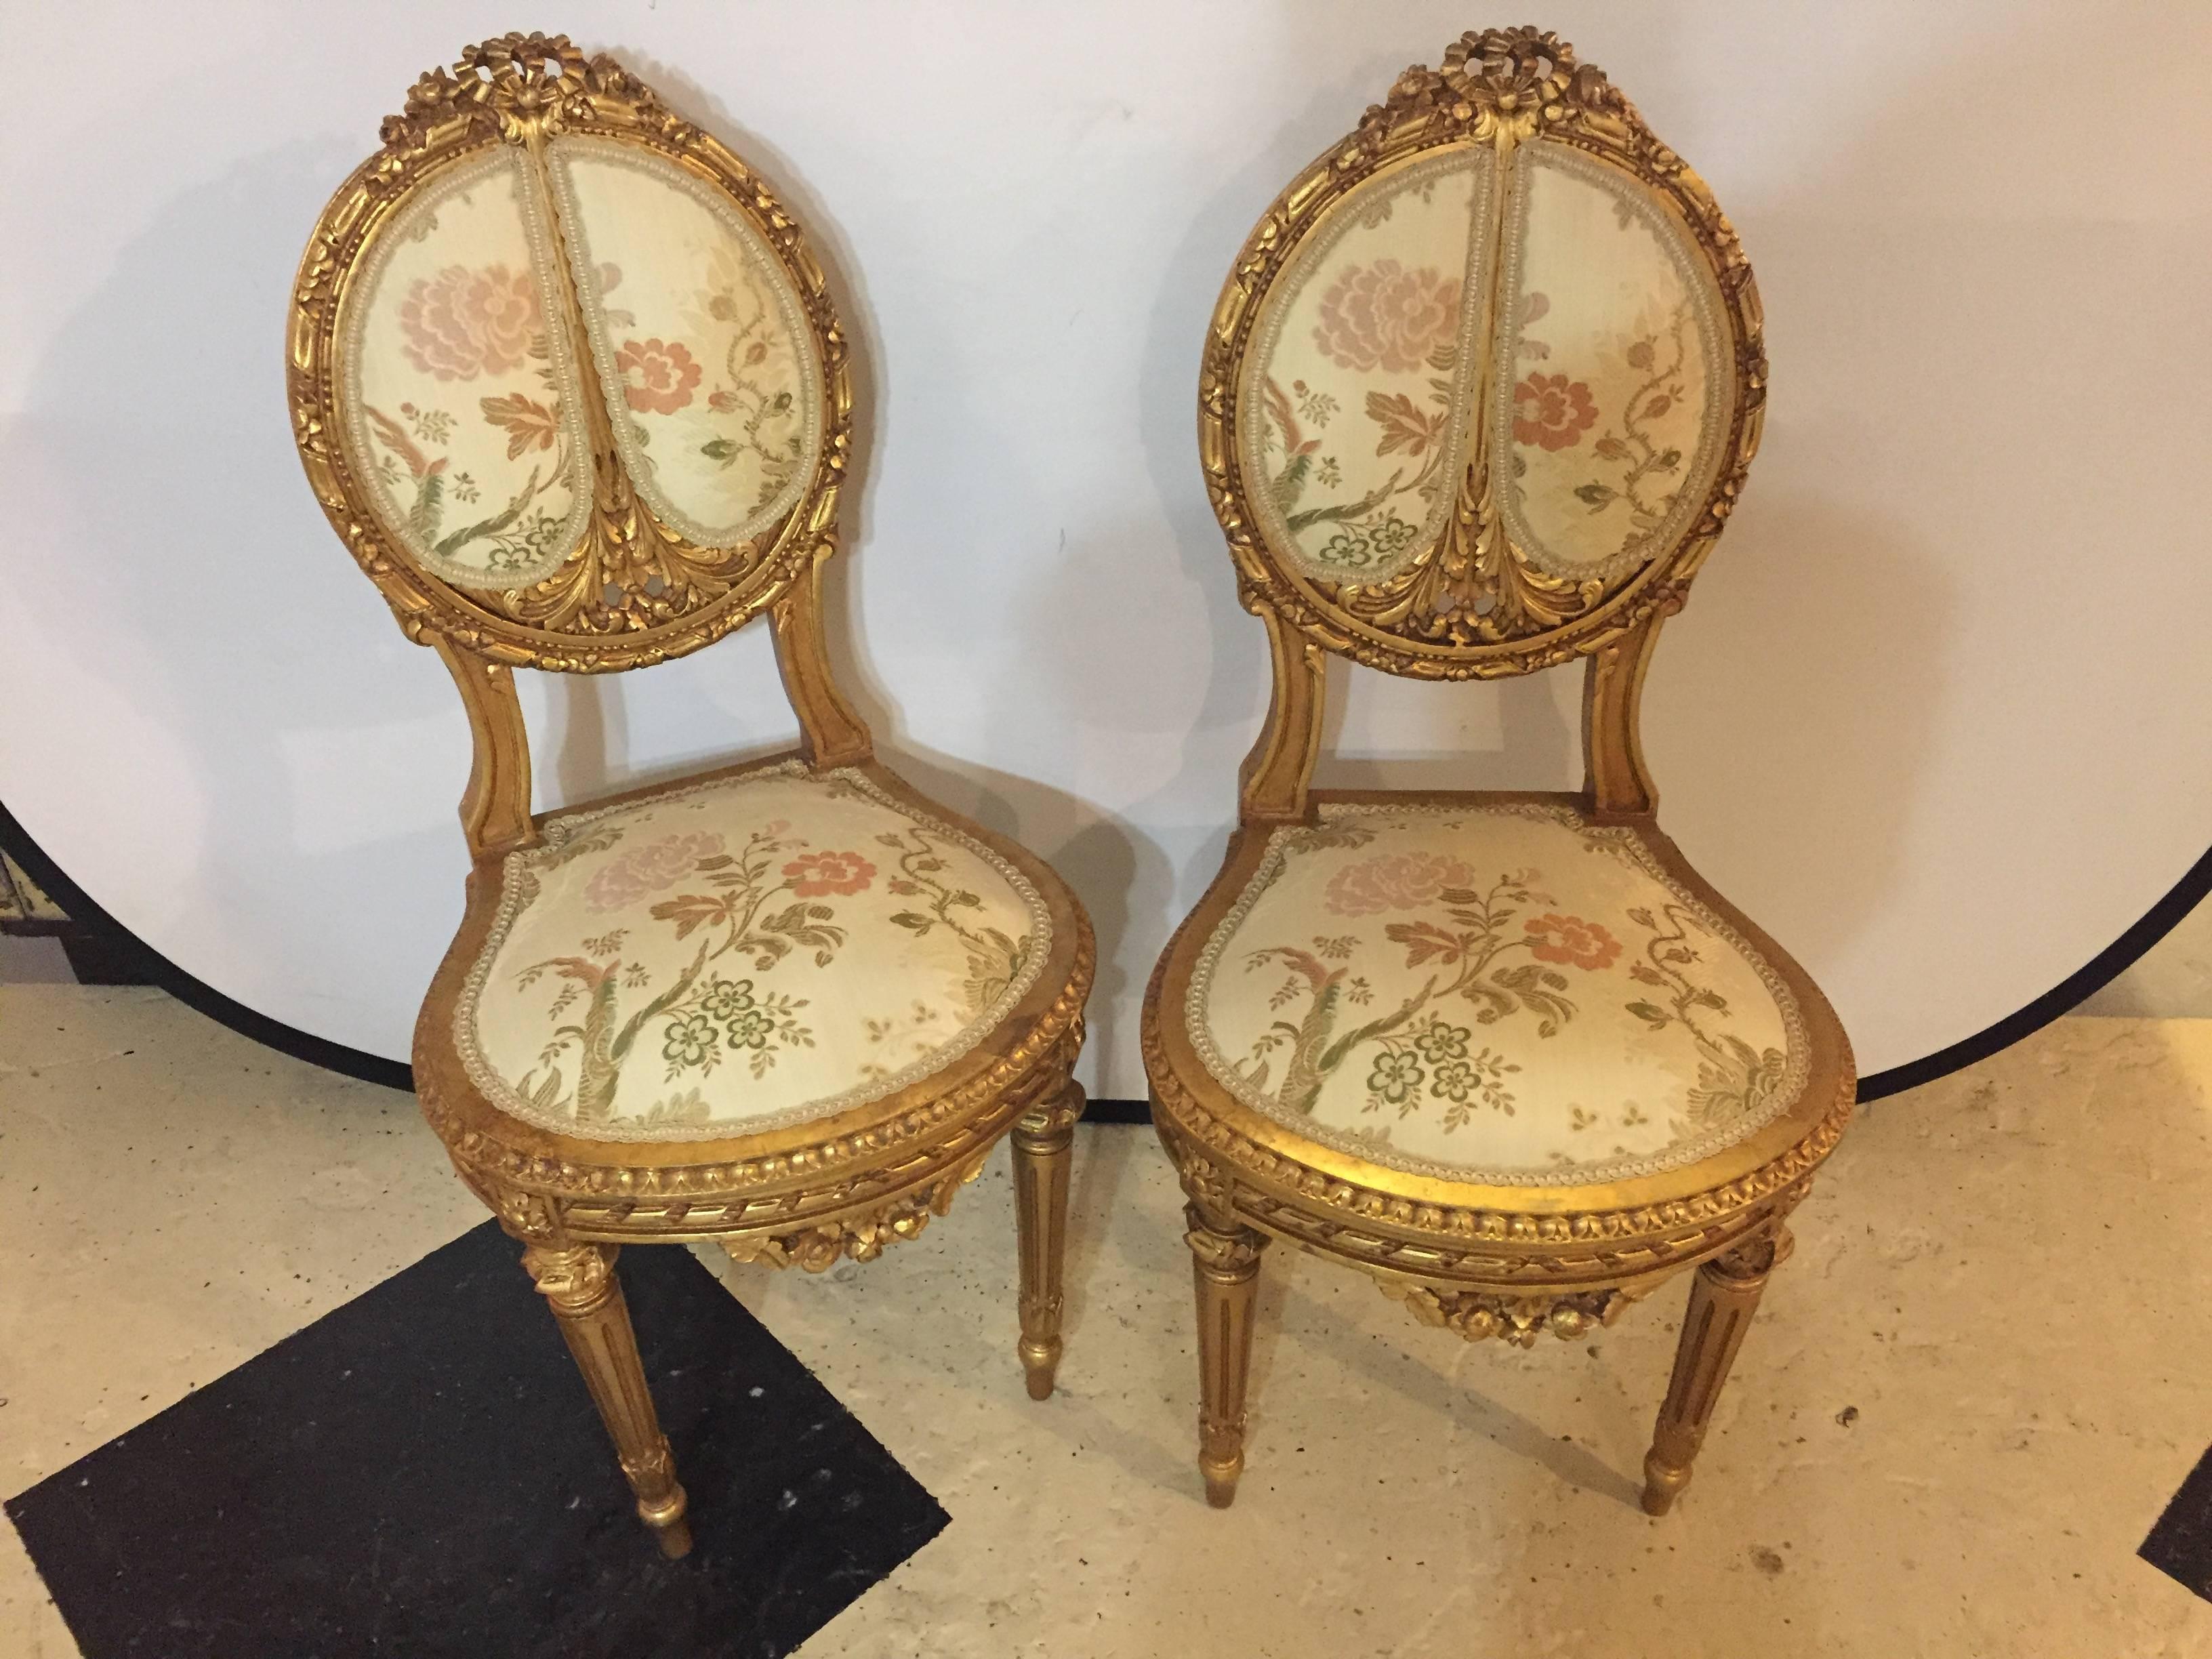 Set of four Louis XVI side chairs each in a fine gilt gold wood finish with carved frames. Having carved roses throughout and tapering legs. Part of a salon set that includes a sofa and pair of bergere chairs, sold separately. This finely carved set